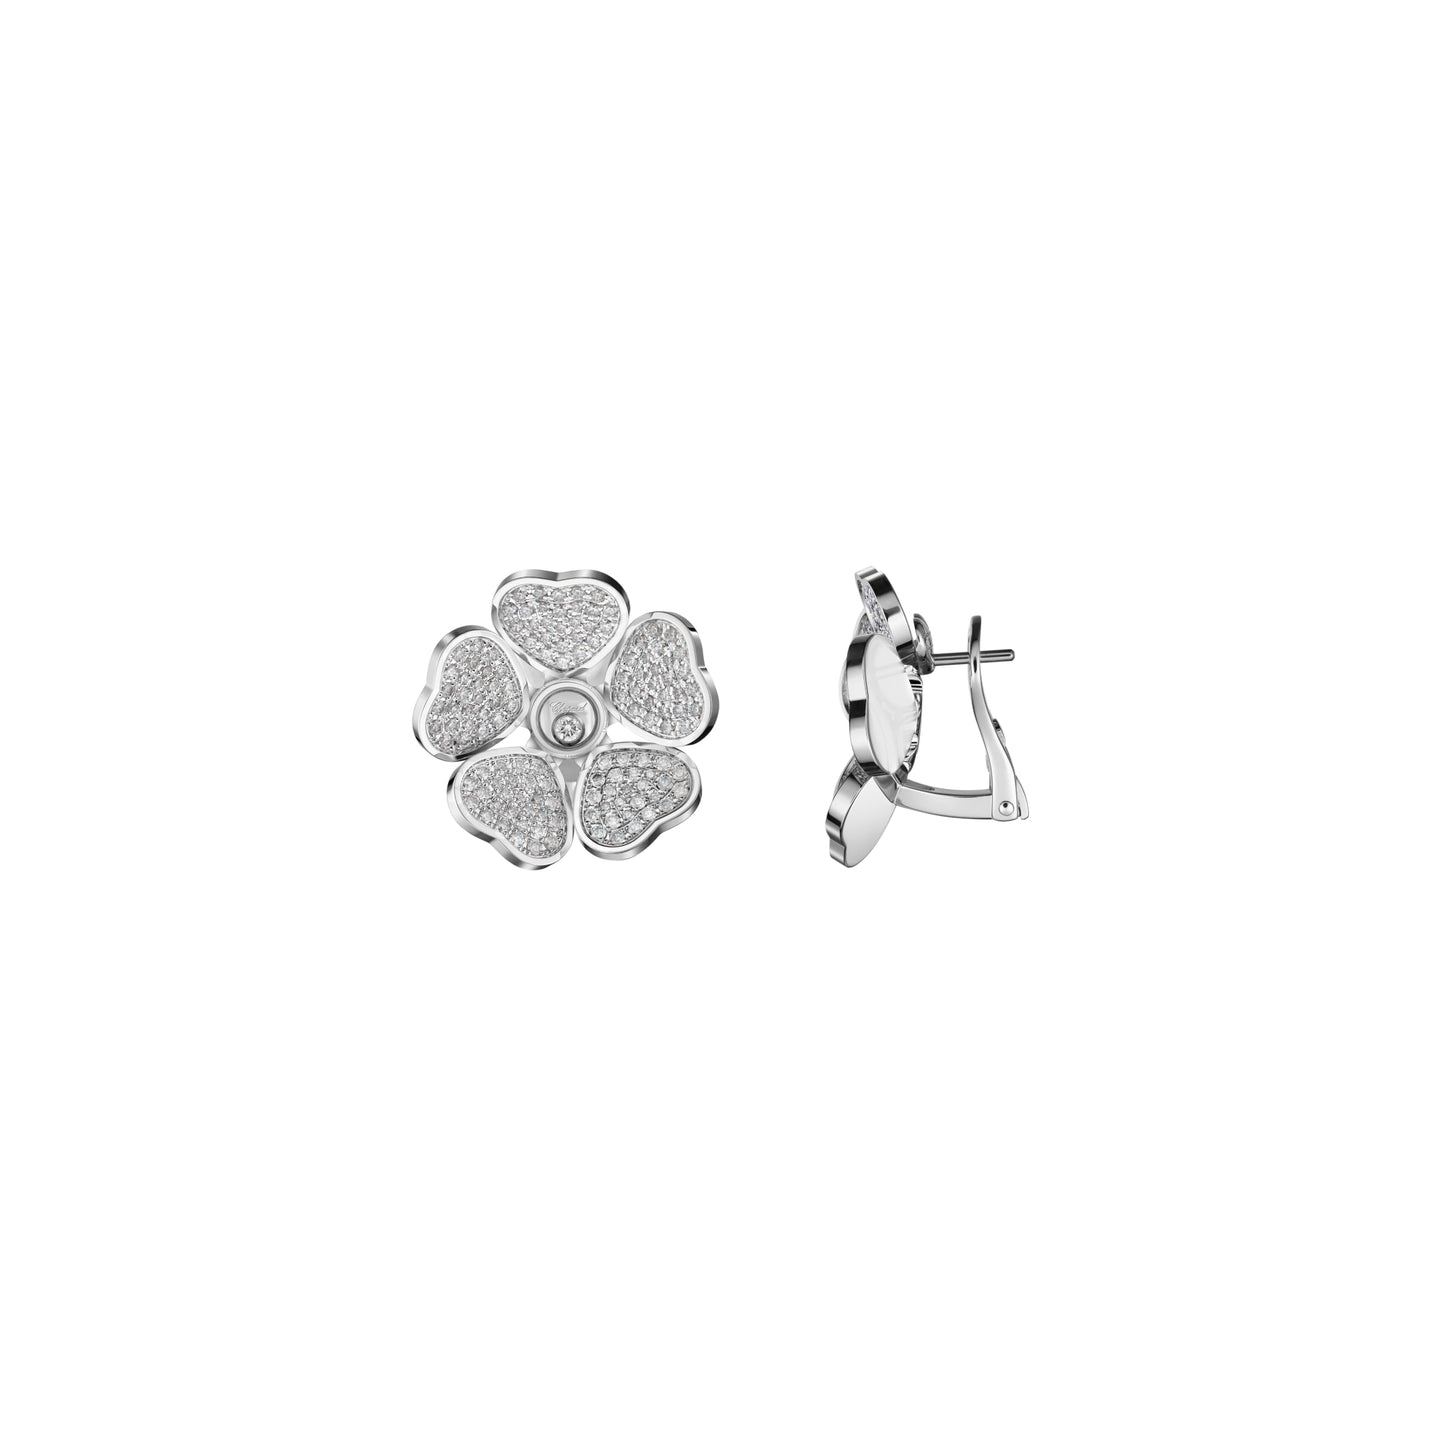 HAPPY HEARTS FLOWERS EARRINGS, ETHICAL WHITE GOLD, DIAMONDS 84A085-1901